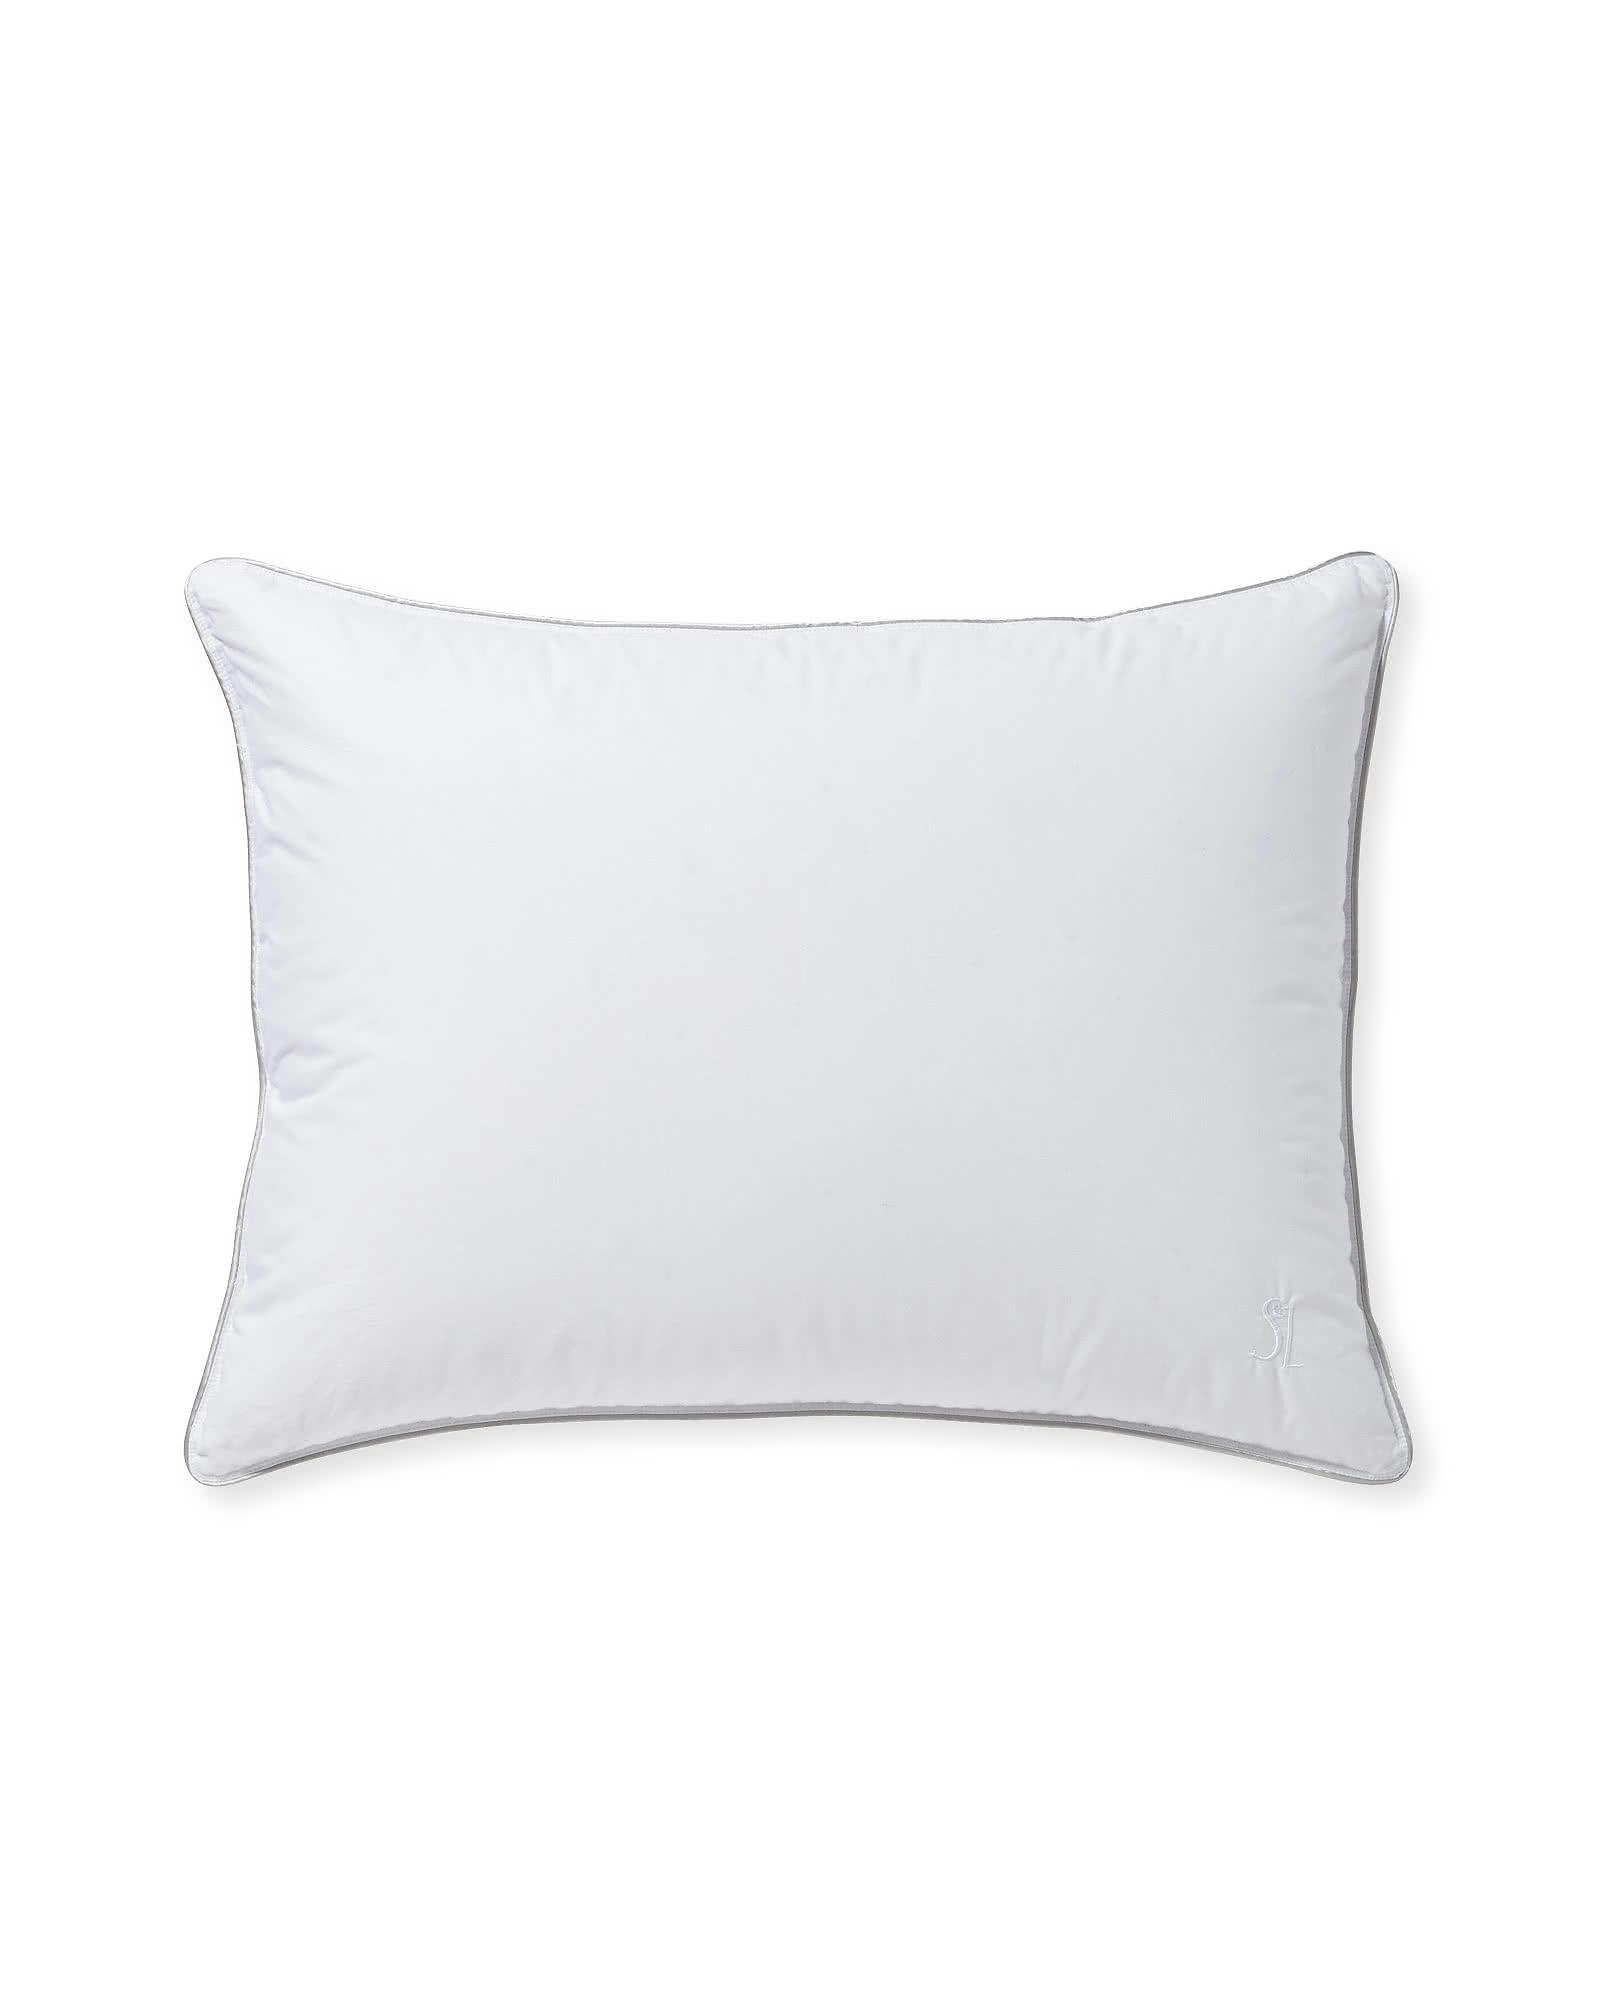 Shop Primaloft® Pillow Inserts (SERENA & LILY), Size: Standard, Density: Medium, Quantity: 4 from Serena & Lily on Openhaus